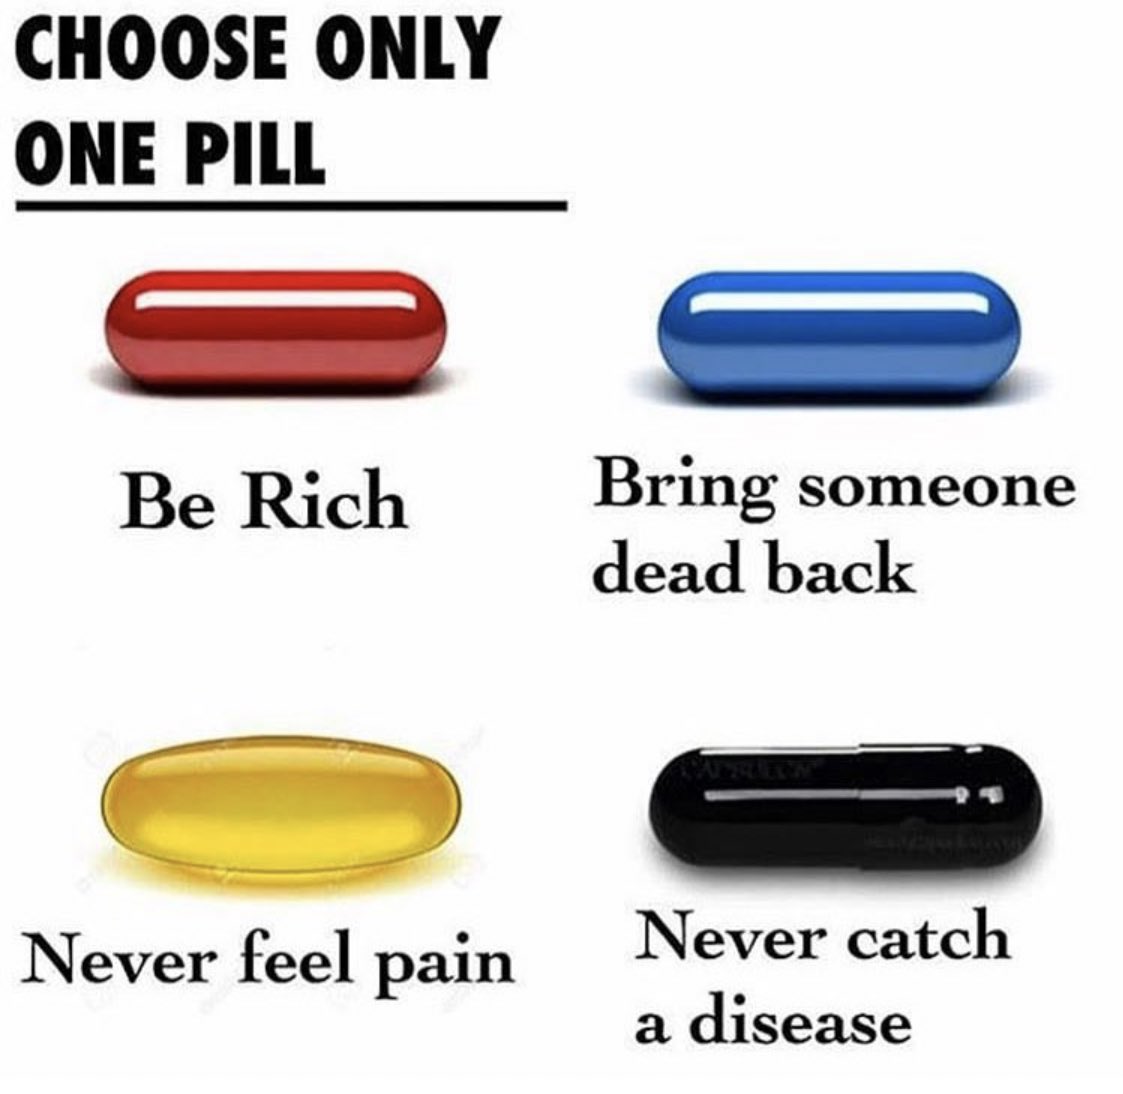 $50 💰 24H
Like, RT
Choose only 1 pill! Tell us why!